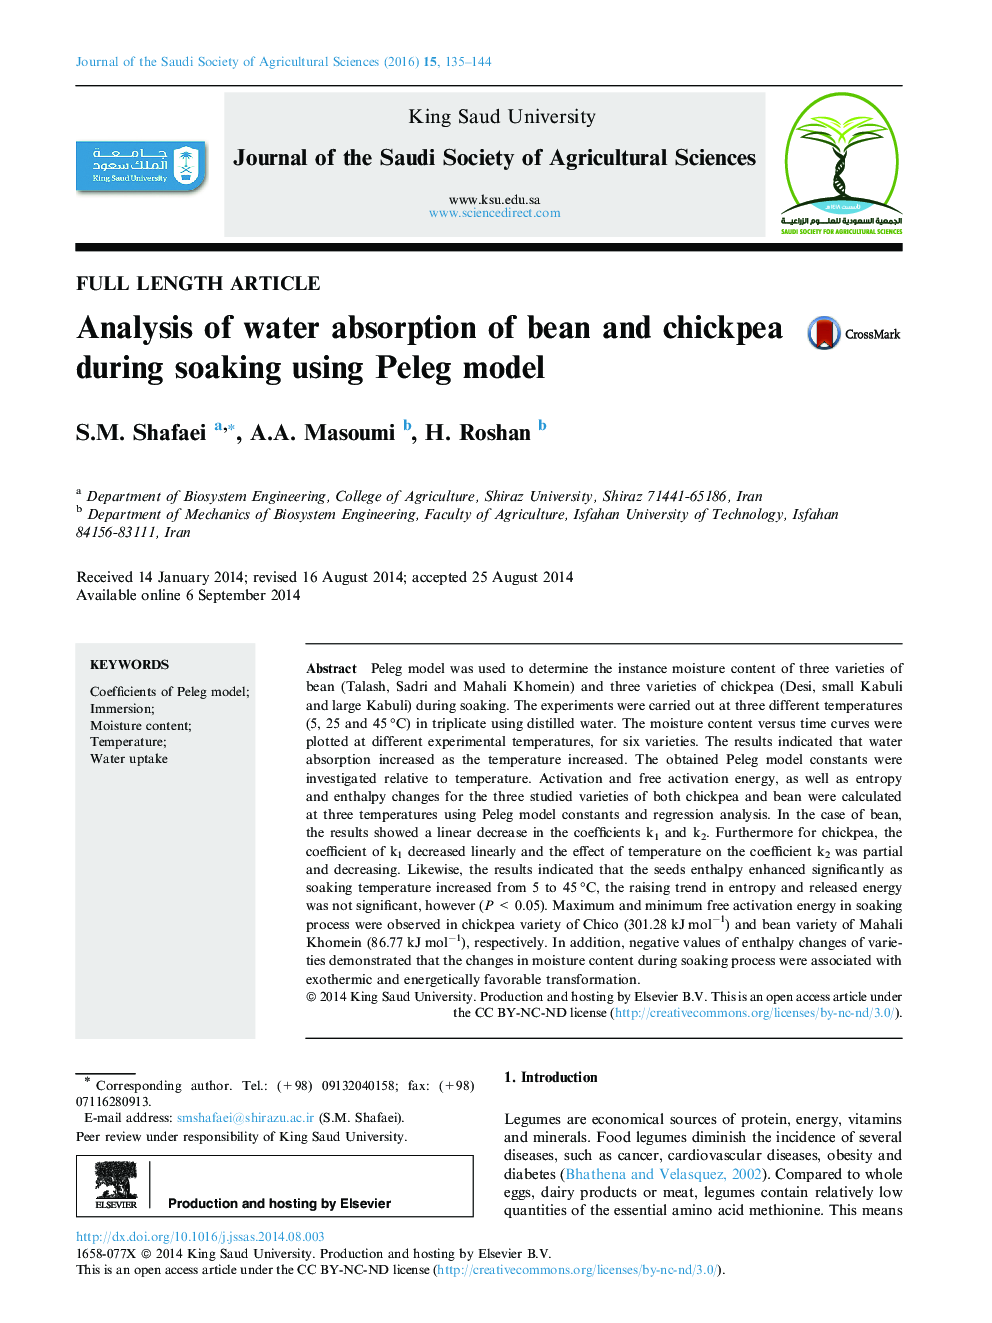 Analysis of water absorption of bean and chickpea during soaking using Peleg model 